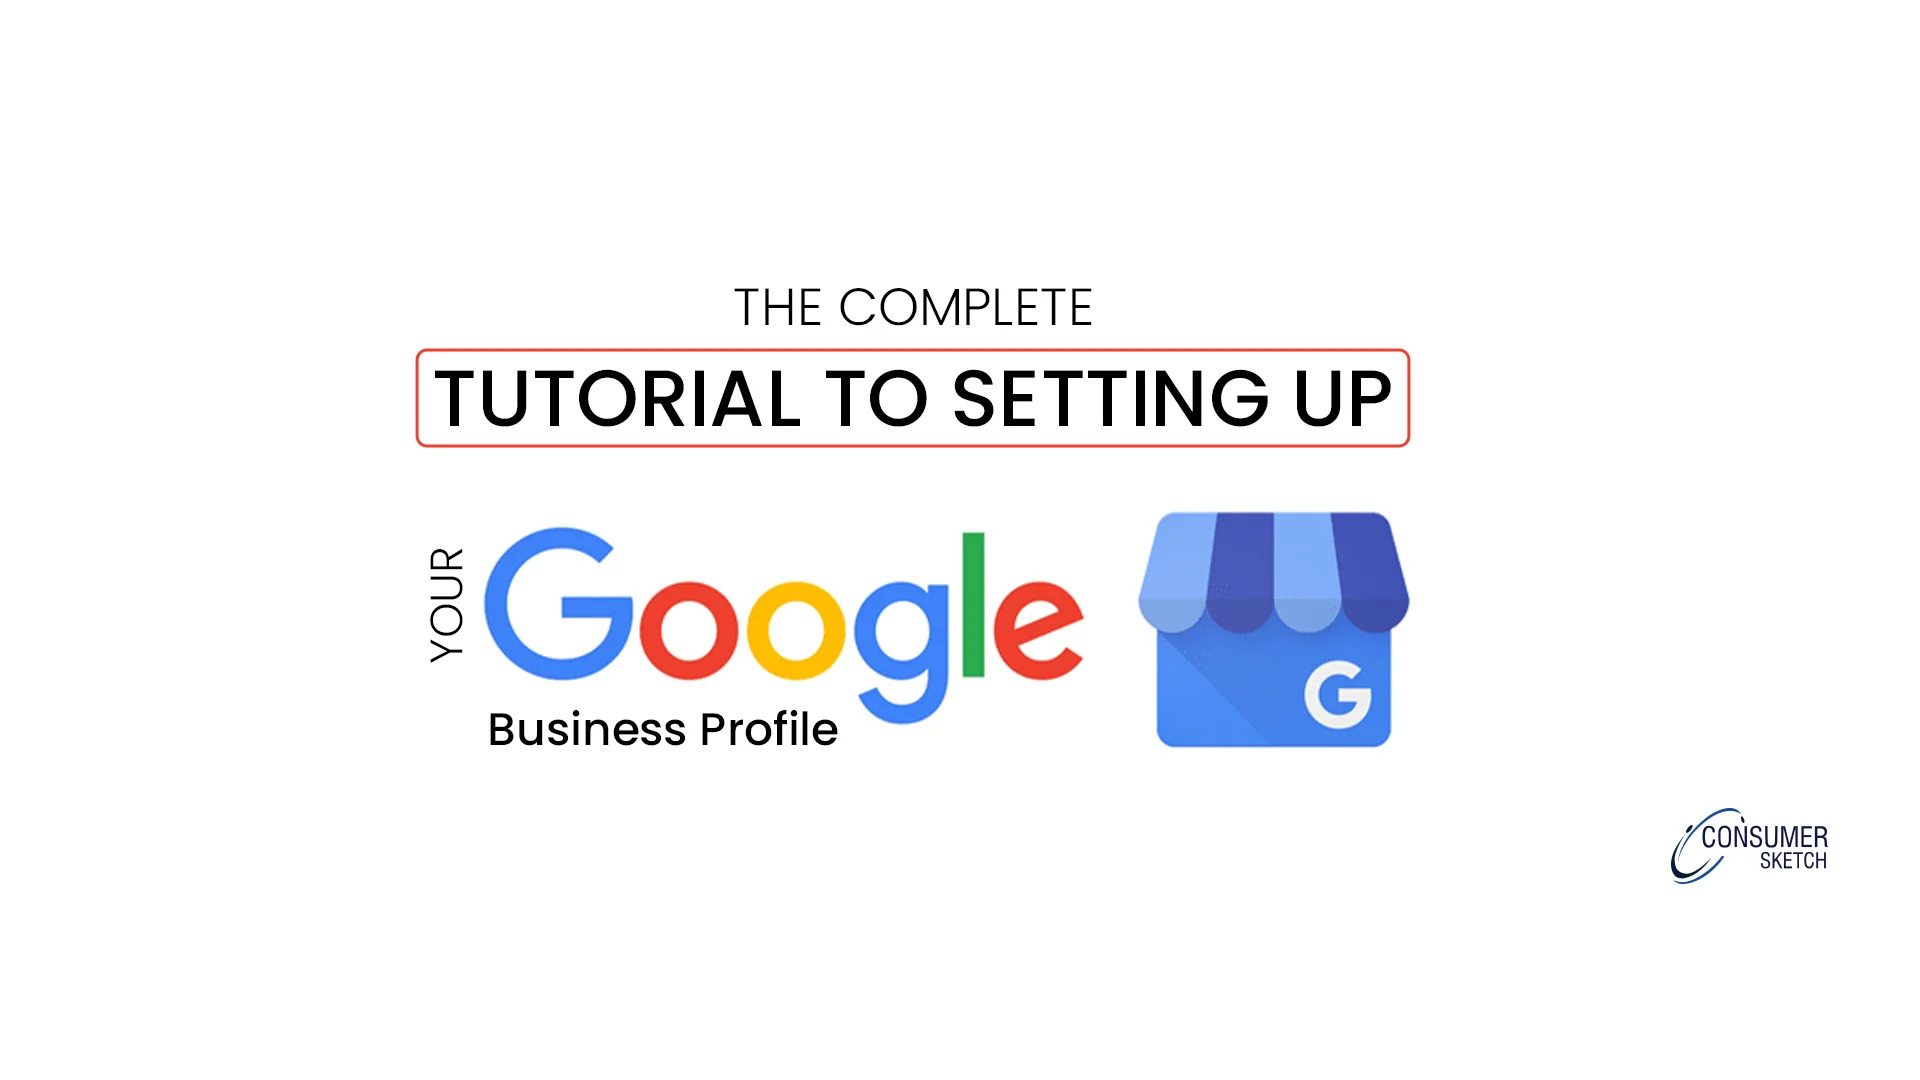 The Complete Tutorial to Setting up Your Google Business Profile